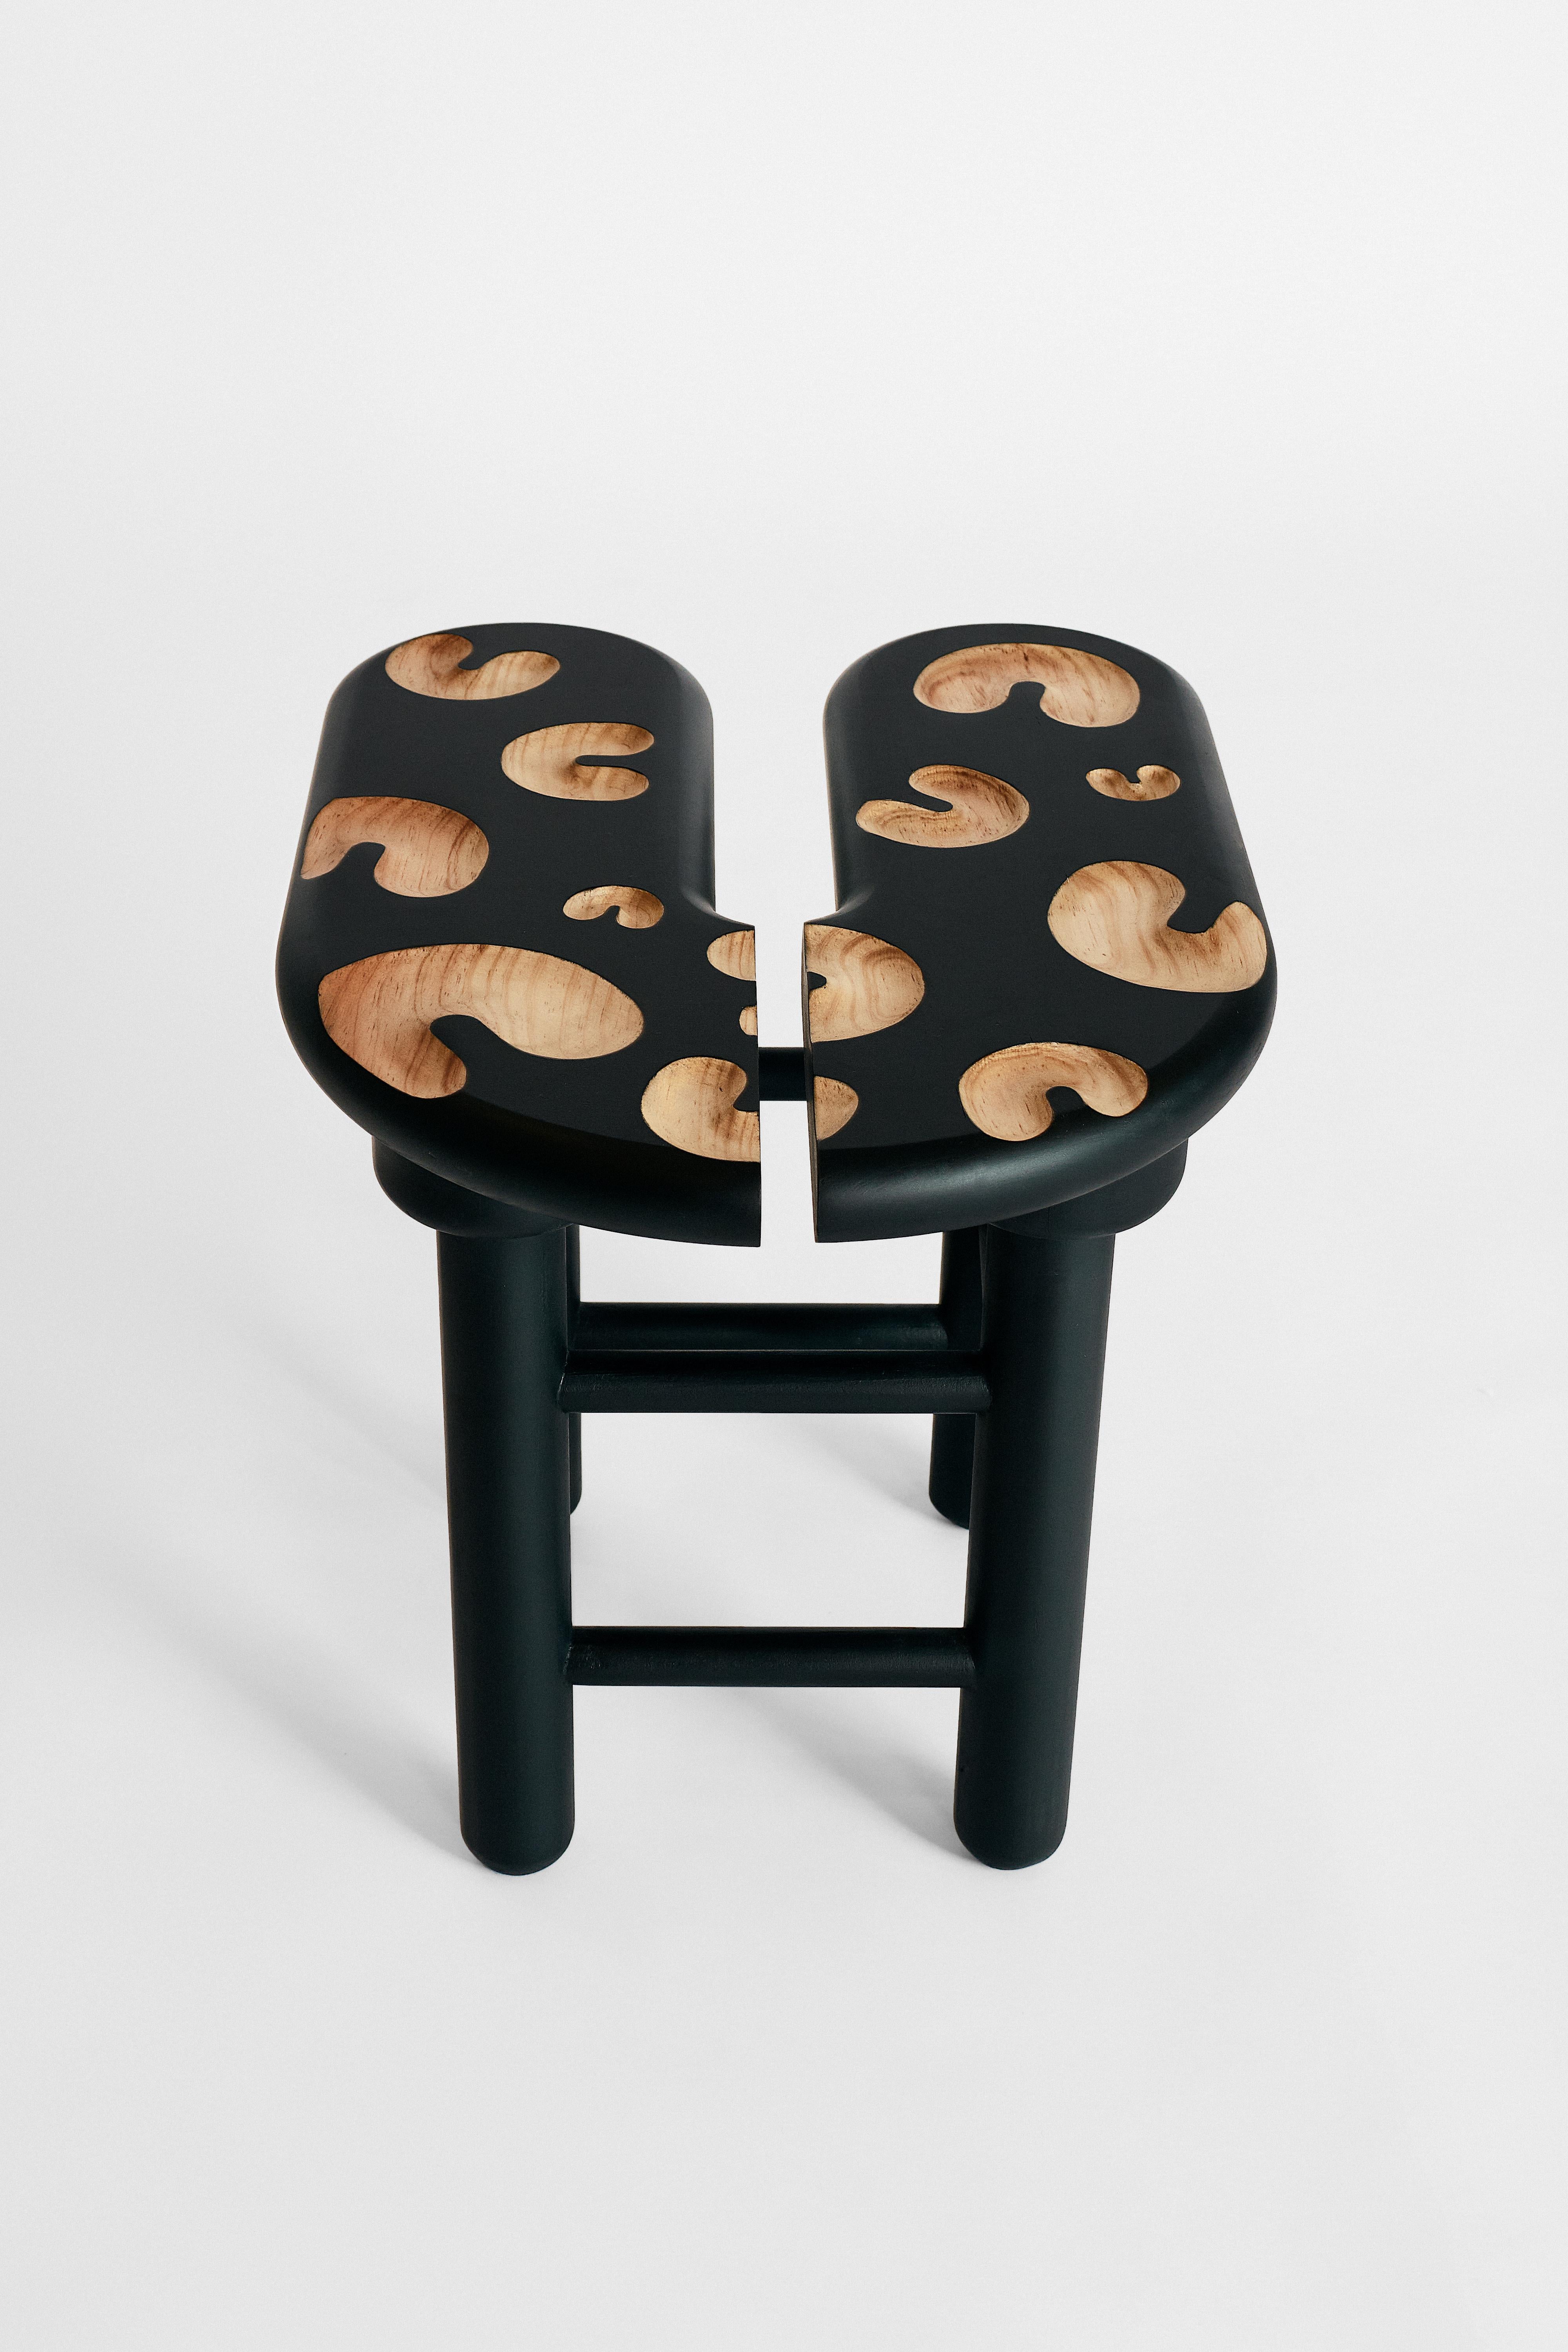 Confetti stool by Lilia Cruz Corona Garduño
Dimensions: W 40 x D 50 x H 43 cm
Materials: Ash wood, charcoal wood stain and polyurethane mate varnish.

Platalea studio was born out of a passion for both art and design. We love how both are so